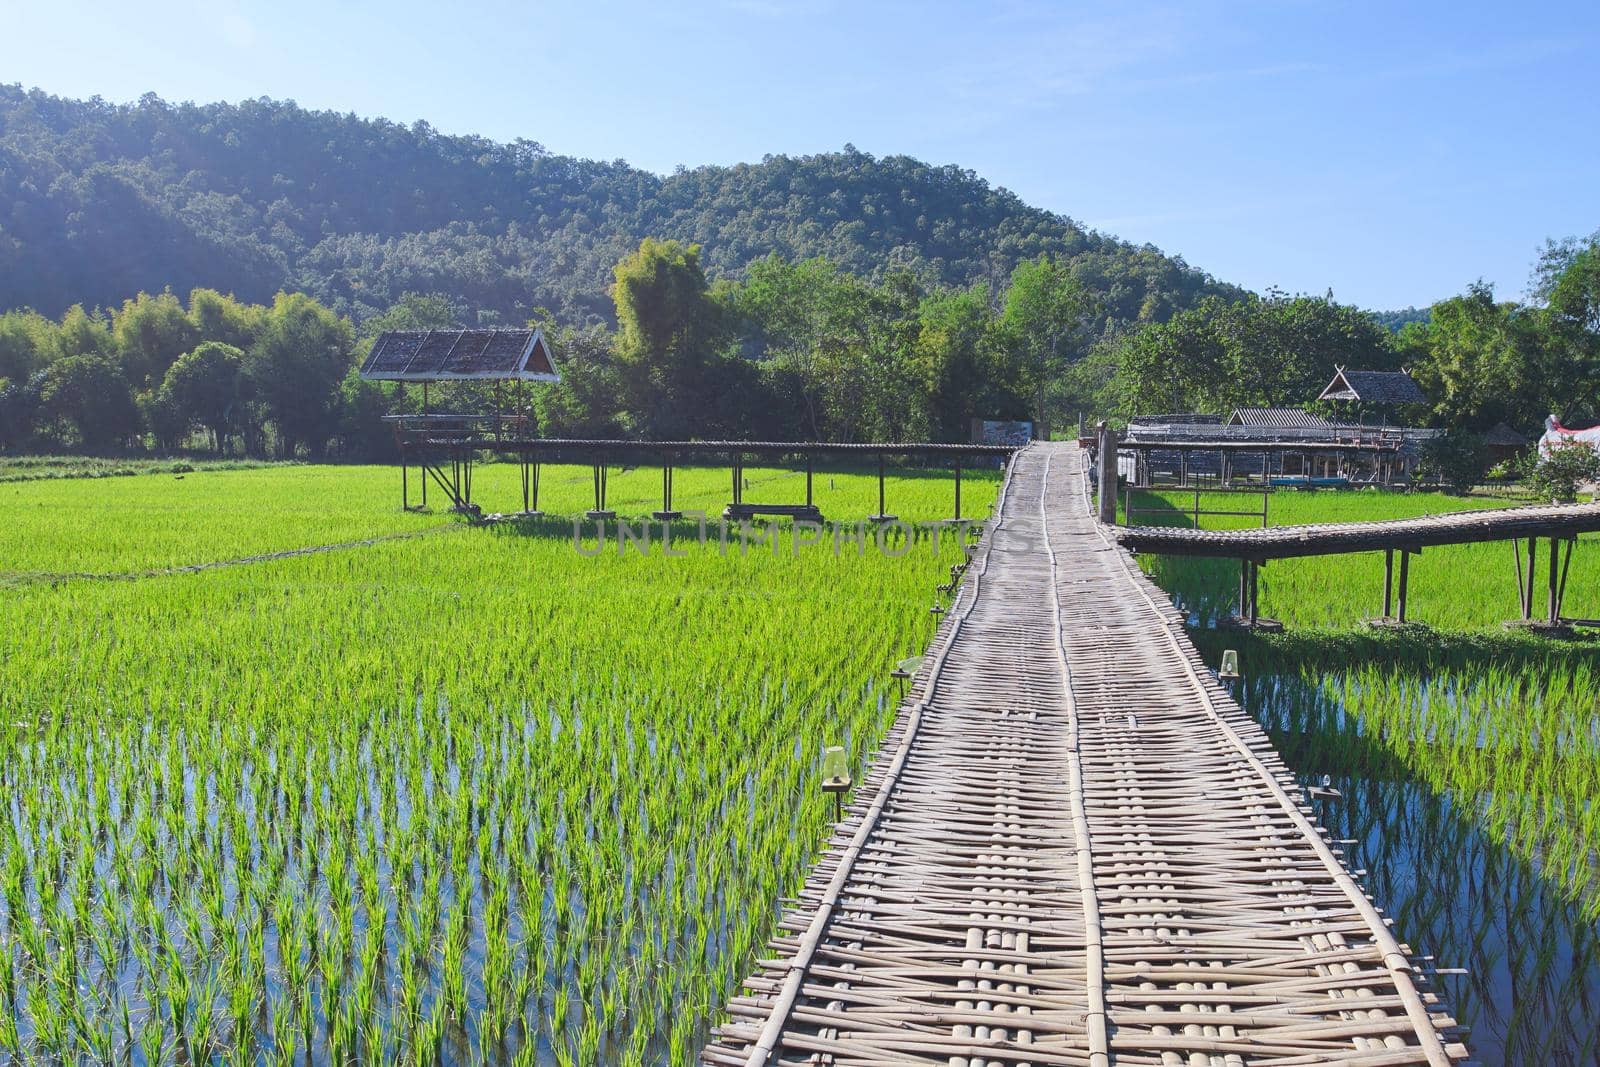 The famous travel destinations of Mae Hong Son Pha Bong Village in local Thai name is Sapankhao Kao Peu Sook. (Translation:Pha Bong Village in Mae Hong Son Province)